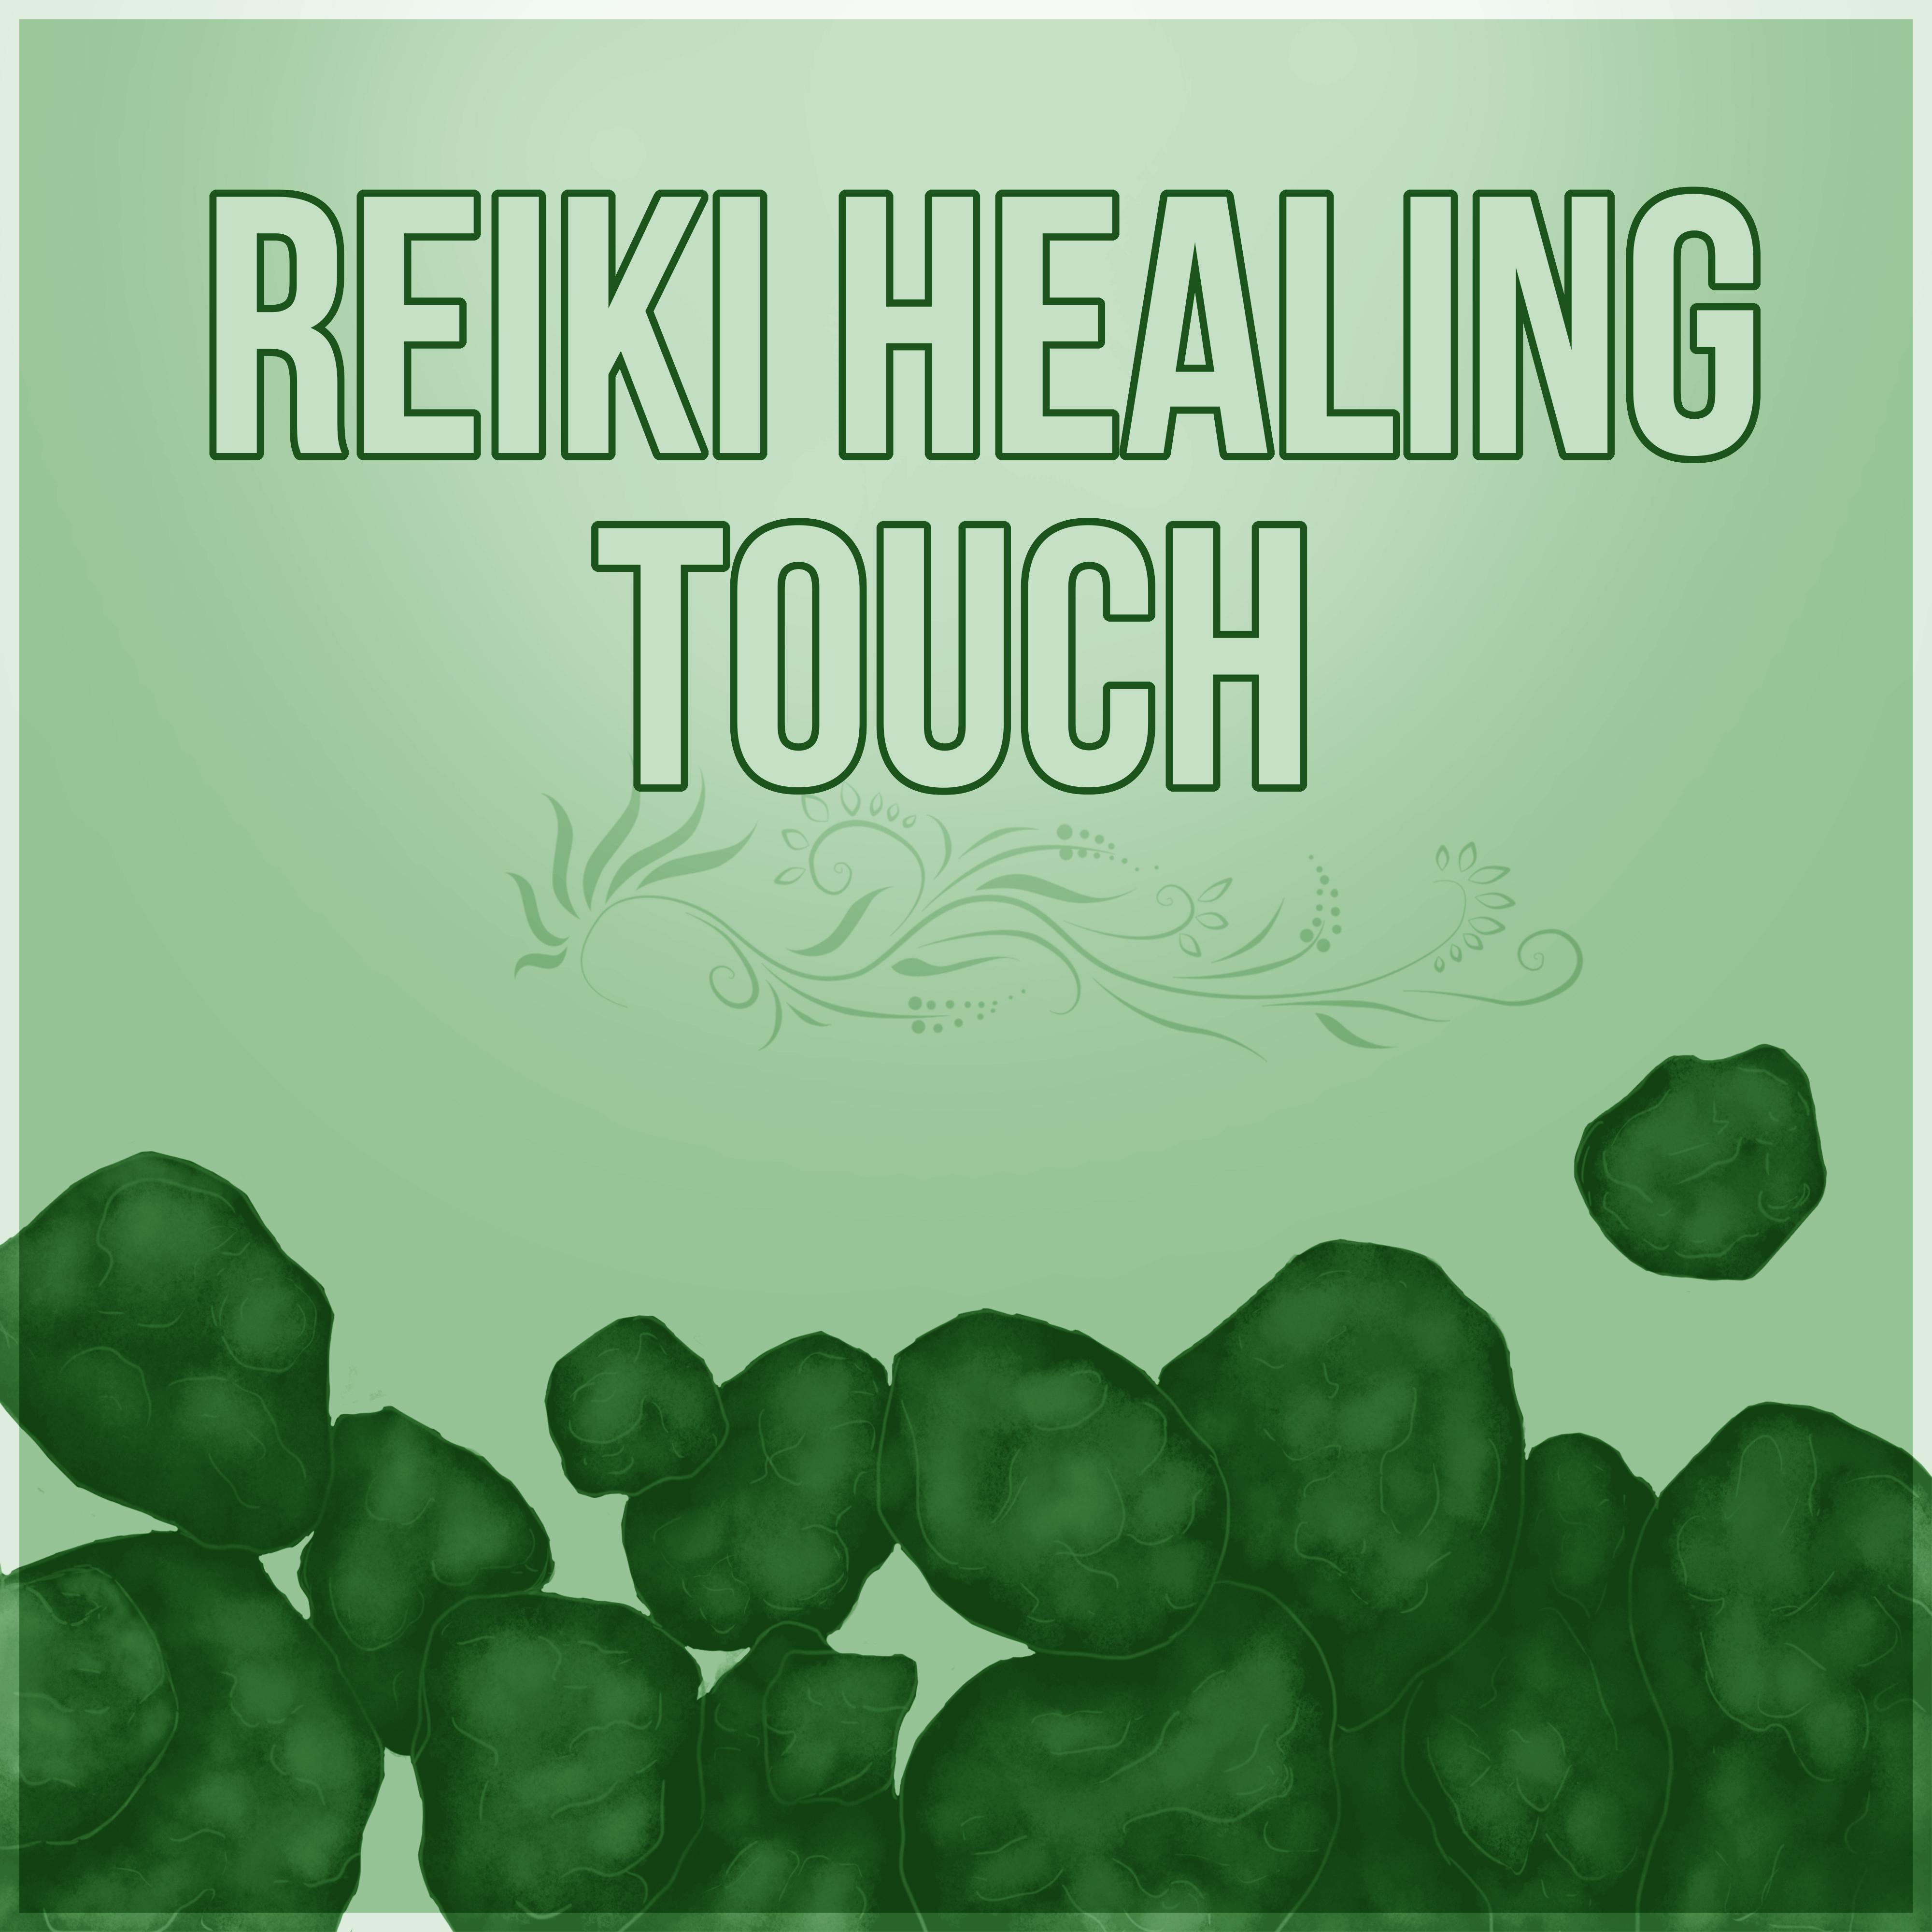 Reiki Healing Touch - Sound Therapy for Relaxation with Sounds of Nature, New Age, Deep Baby Sleep, Study, Massage, Relaxing Yoga, Serenity Spa, Zen Natural White Noise